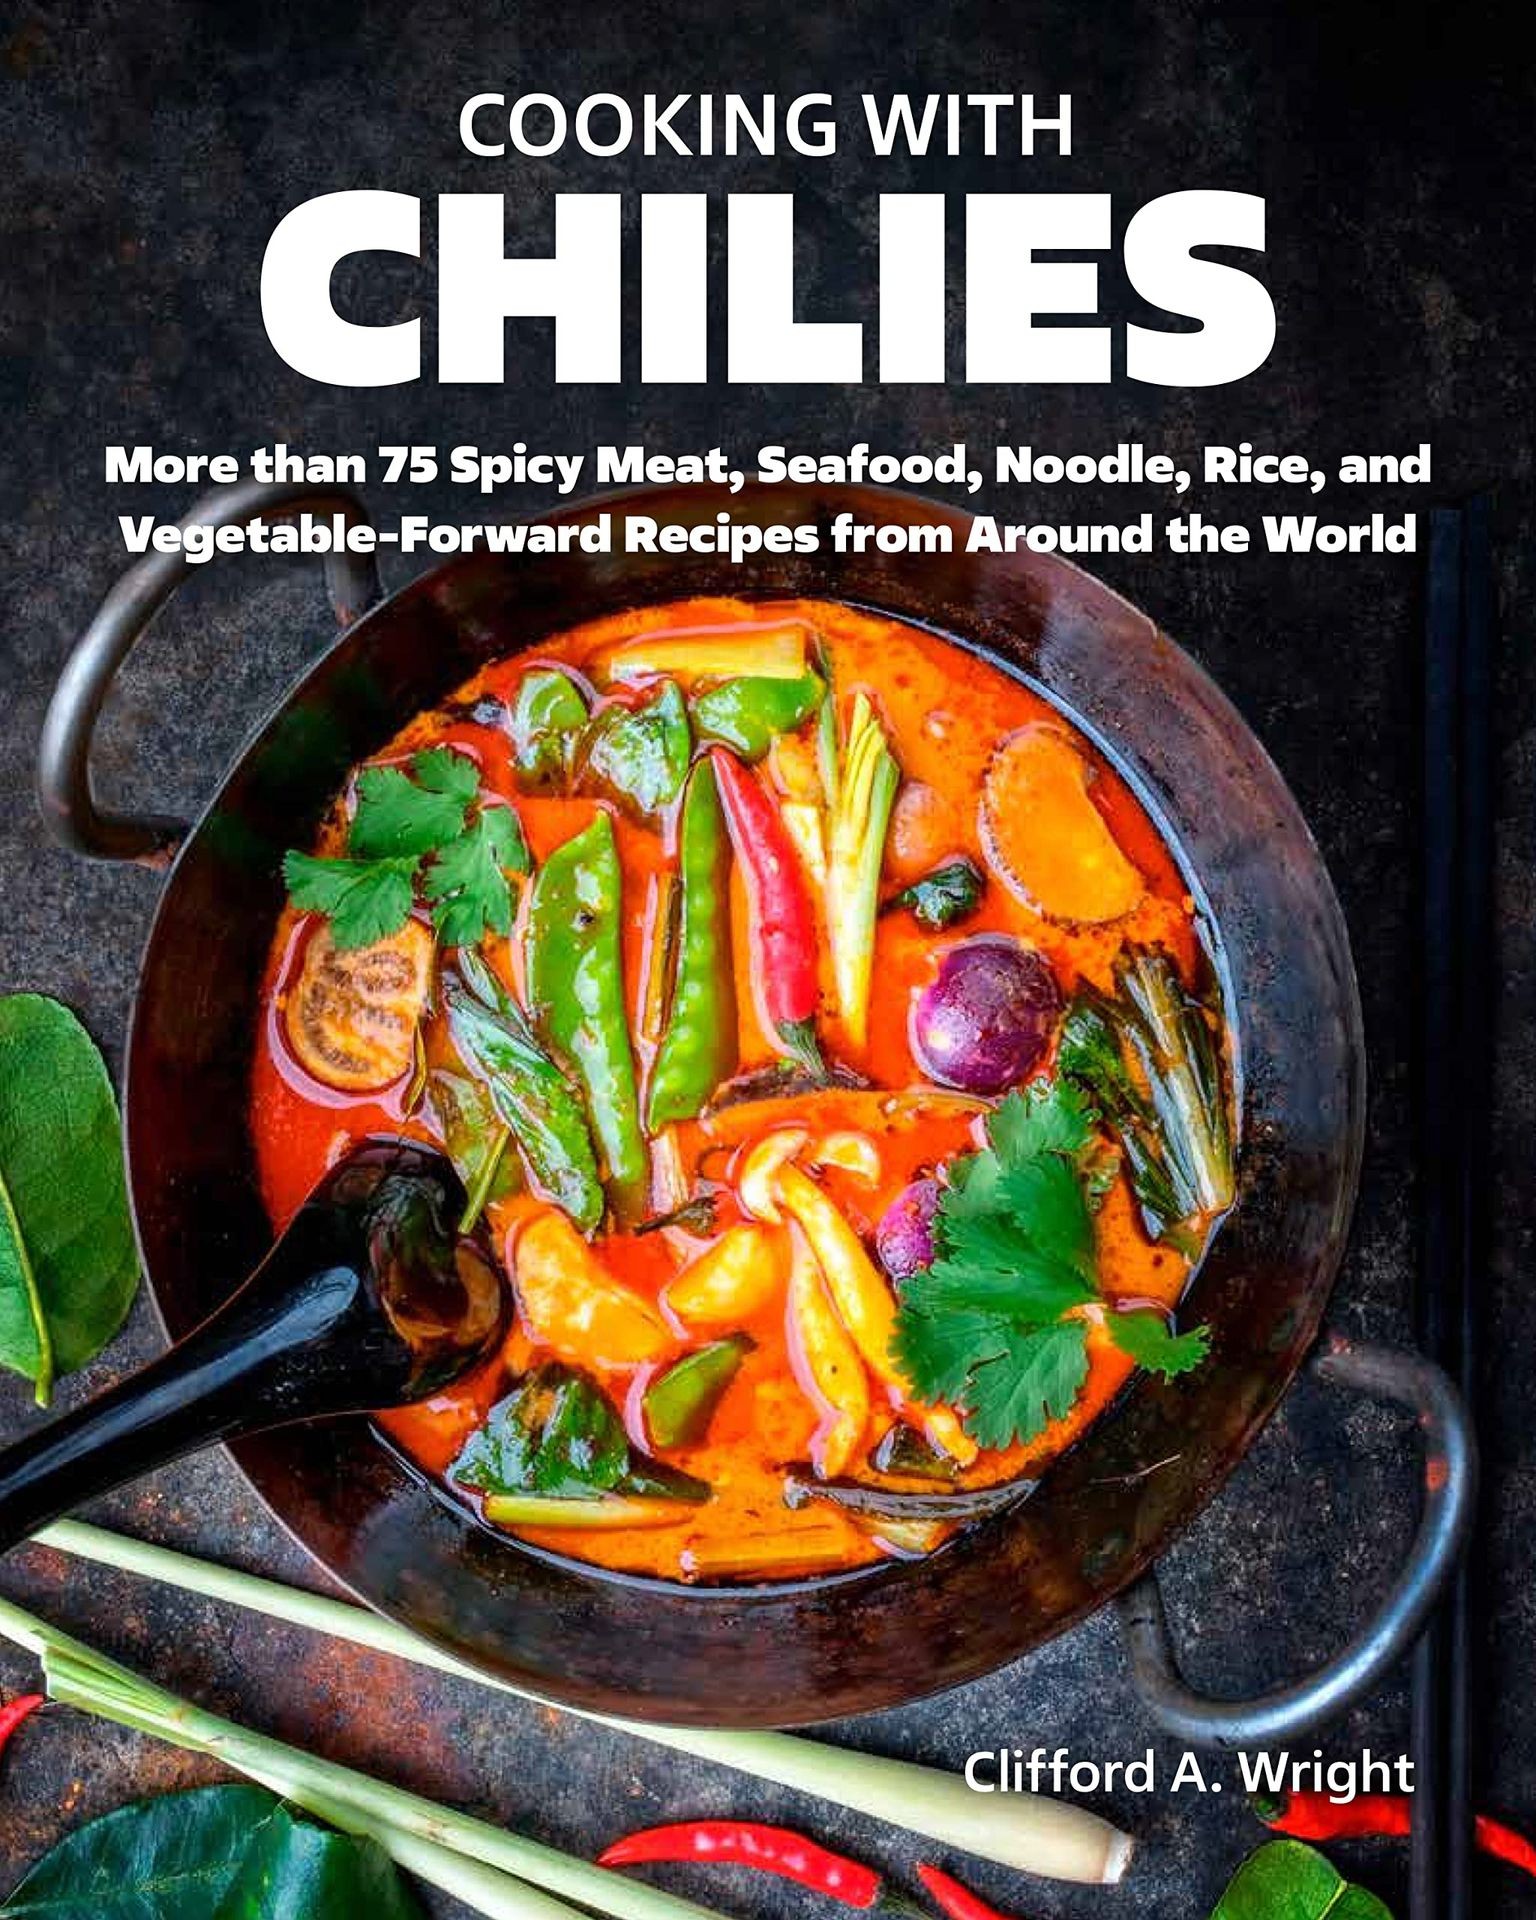 Cooking with Chilies